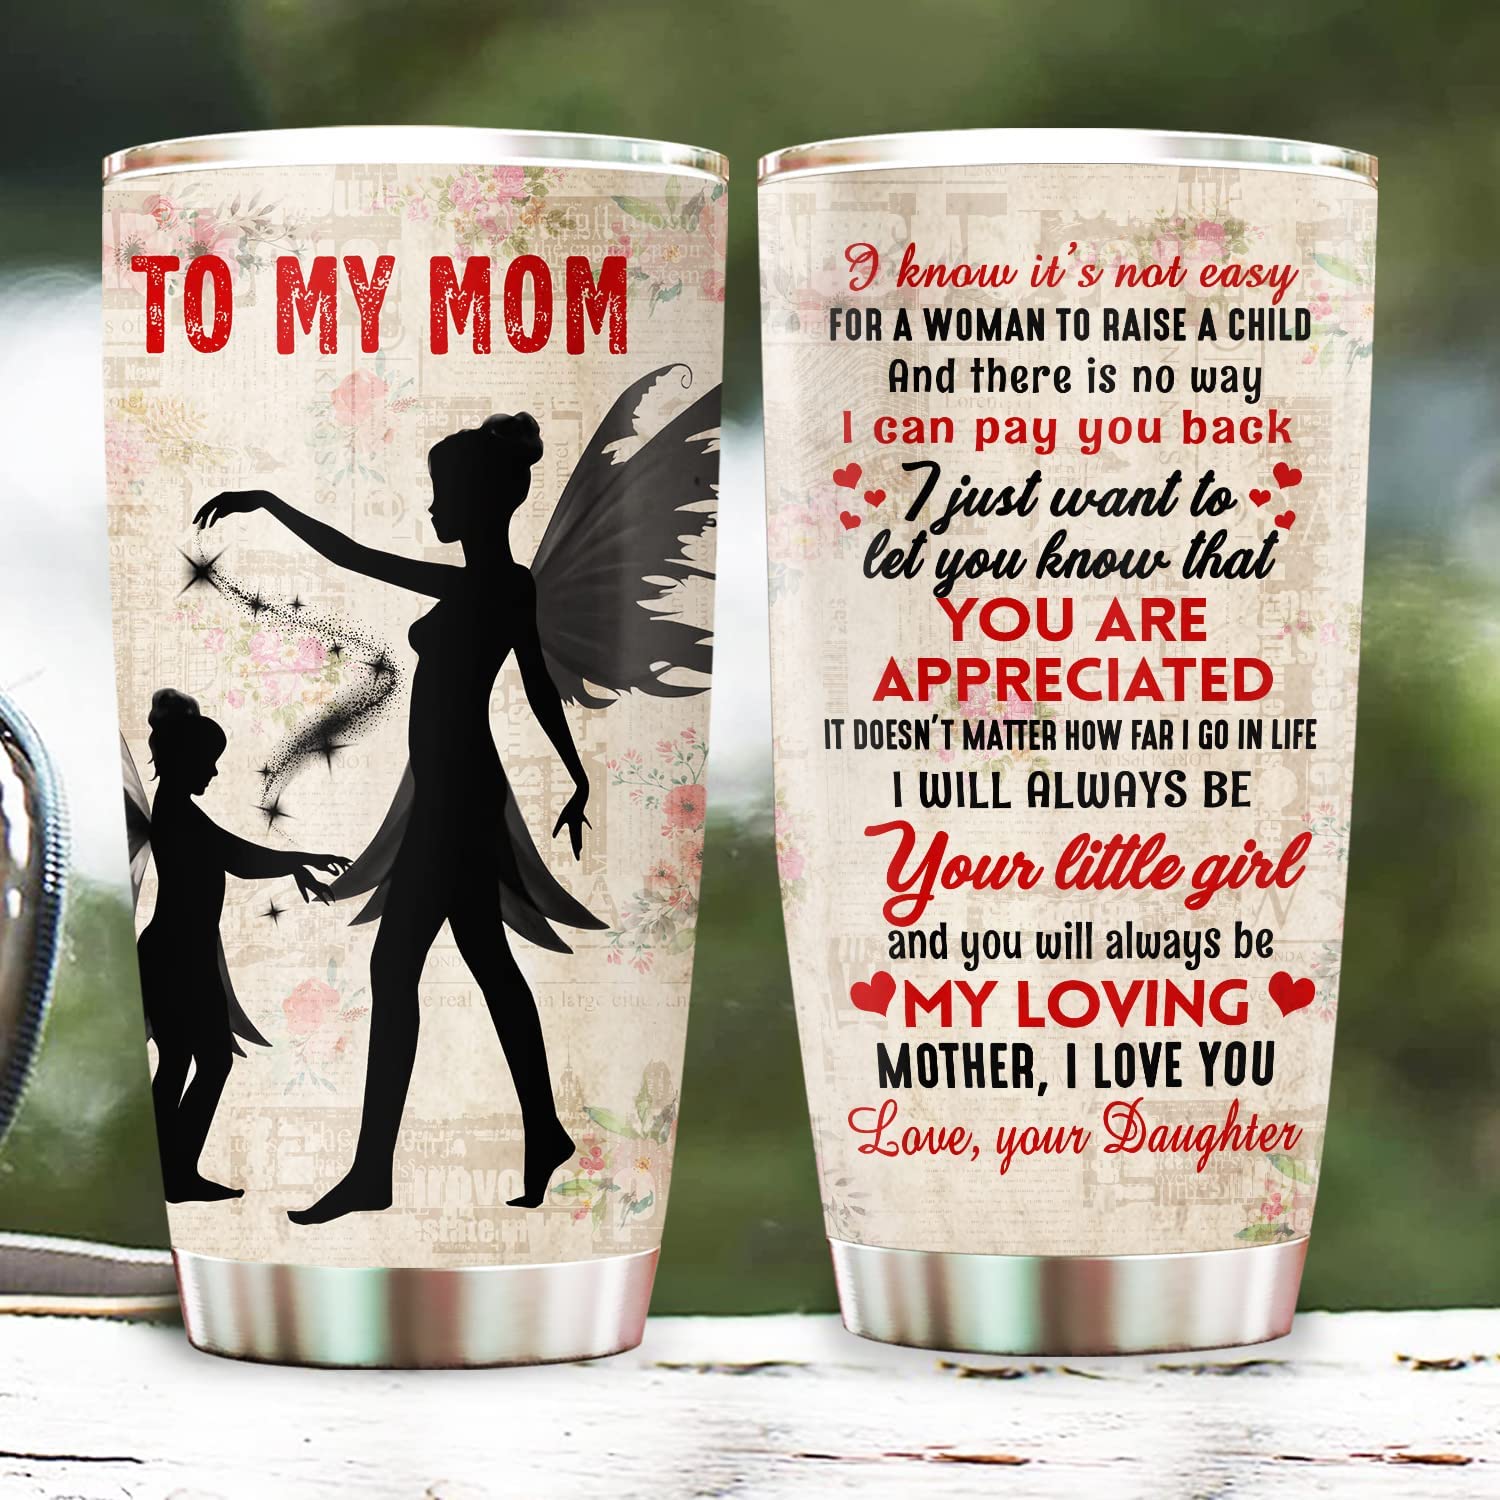 Mothers Day Gifts, To My Mom Tumbler, Mother Mama Mom Gift on Christmas Birthday, Birthday Gifts for Mom from Daughter 20oz Stainless Steel Tumbler Cup with Lid Cold & Hot Water Coffee